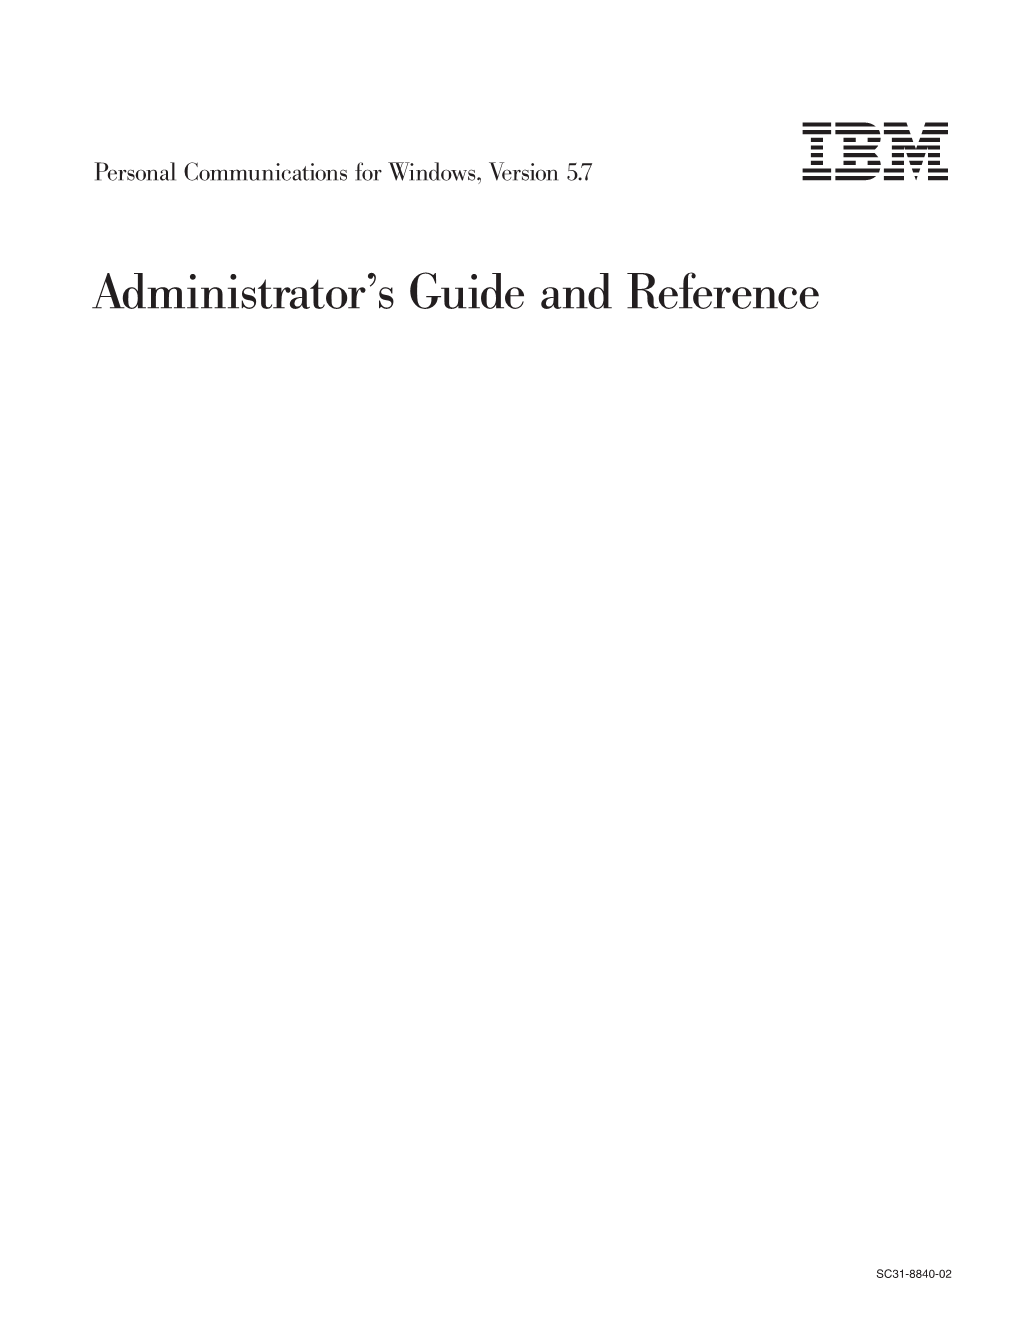 Personal Communications Administrator's Guide and Reference